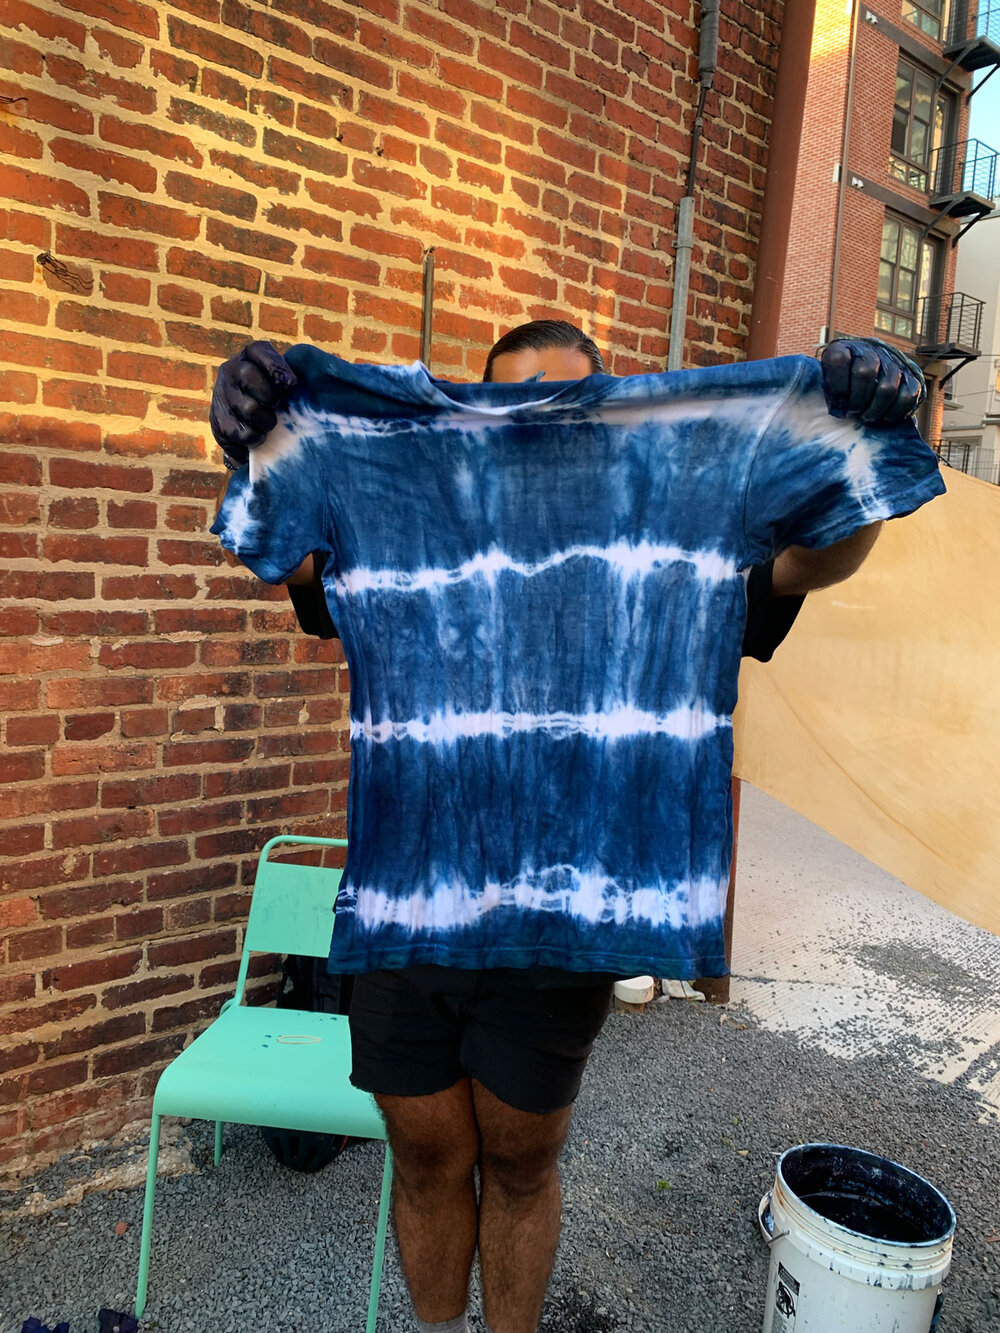 Tie Dyeing with Indigo - The Fabric Workshop and Museum